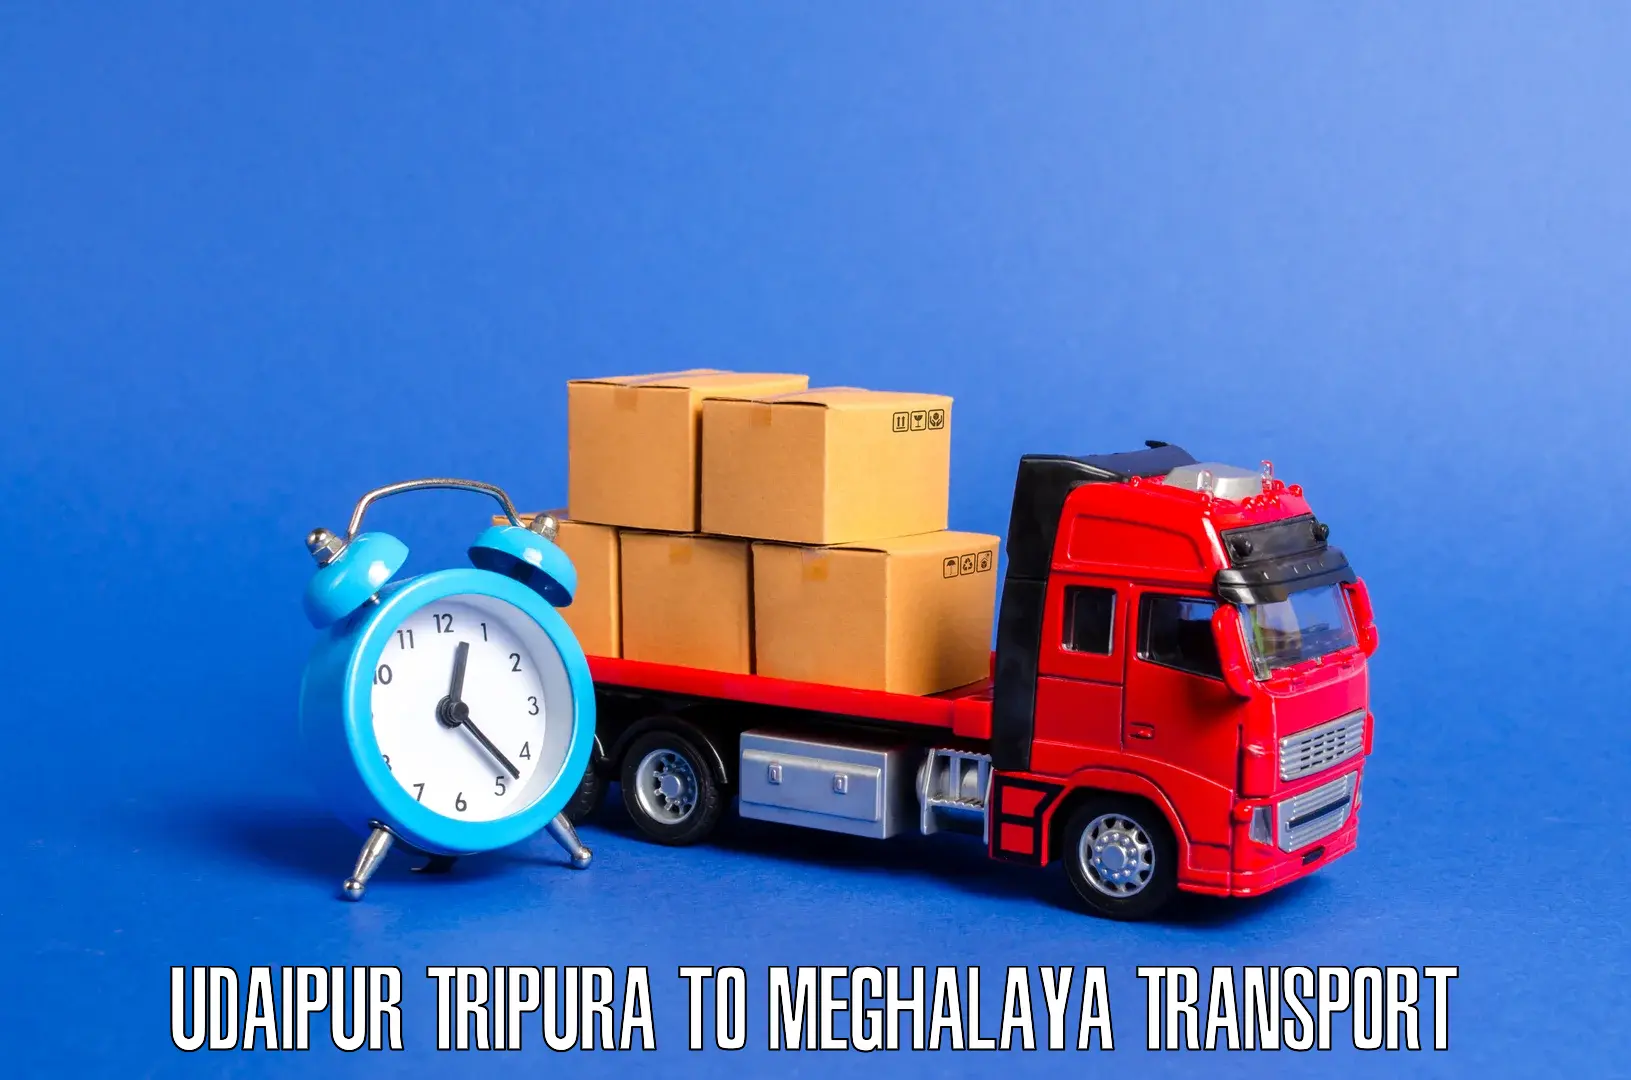 Air freight transport services Udaipur Tripura to Nongpoh